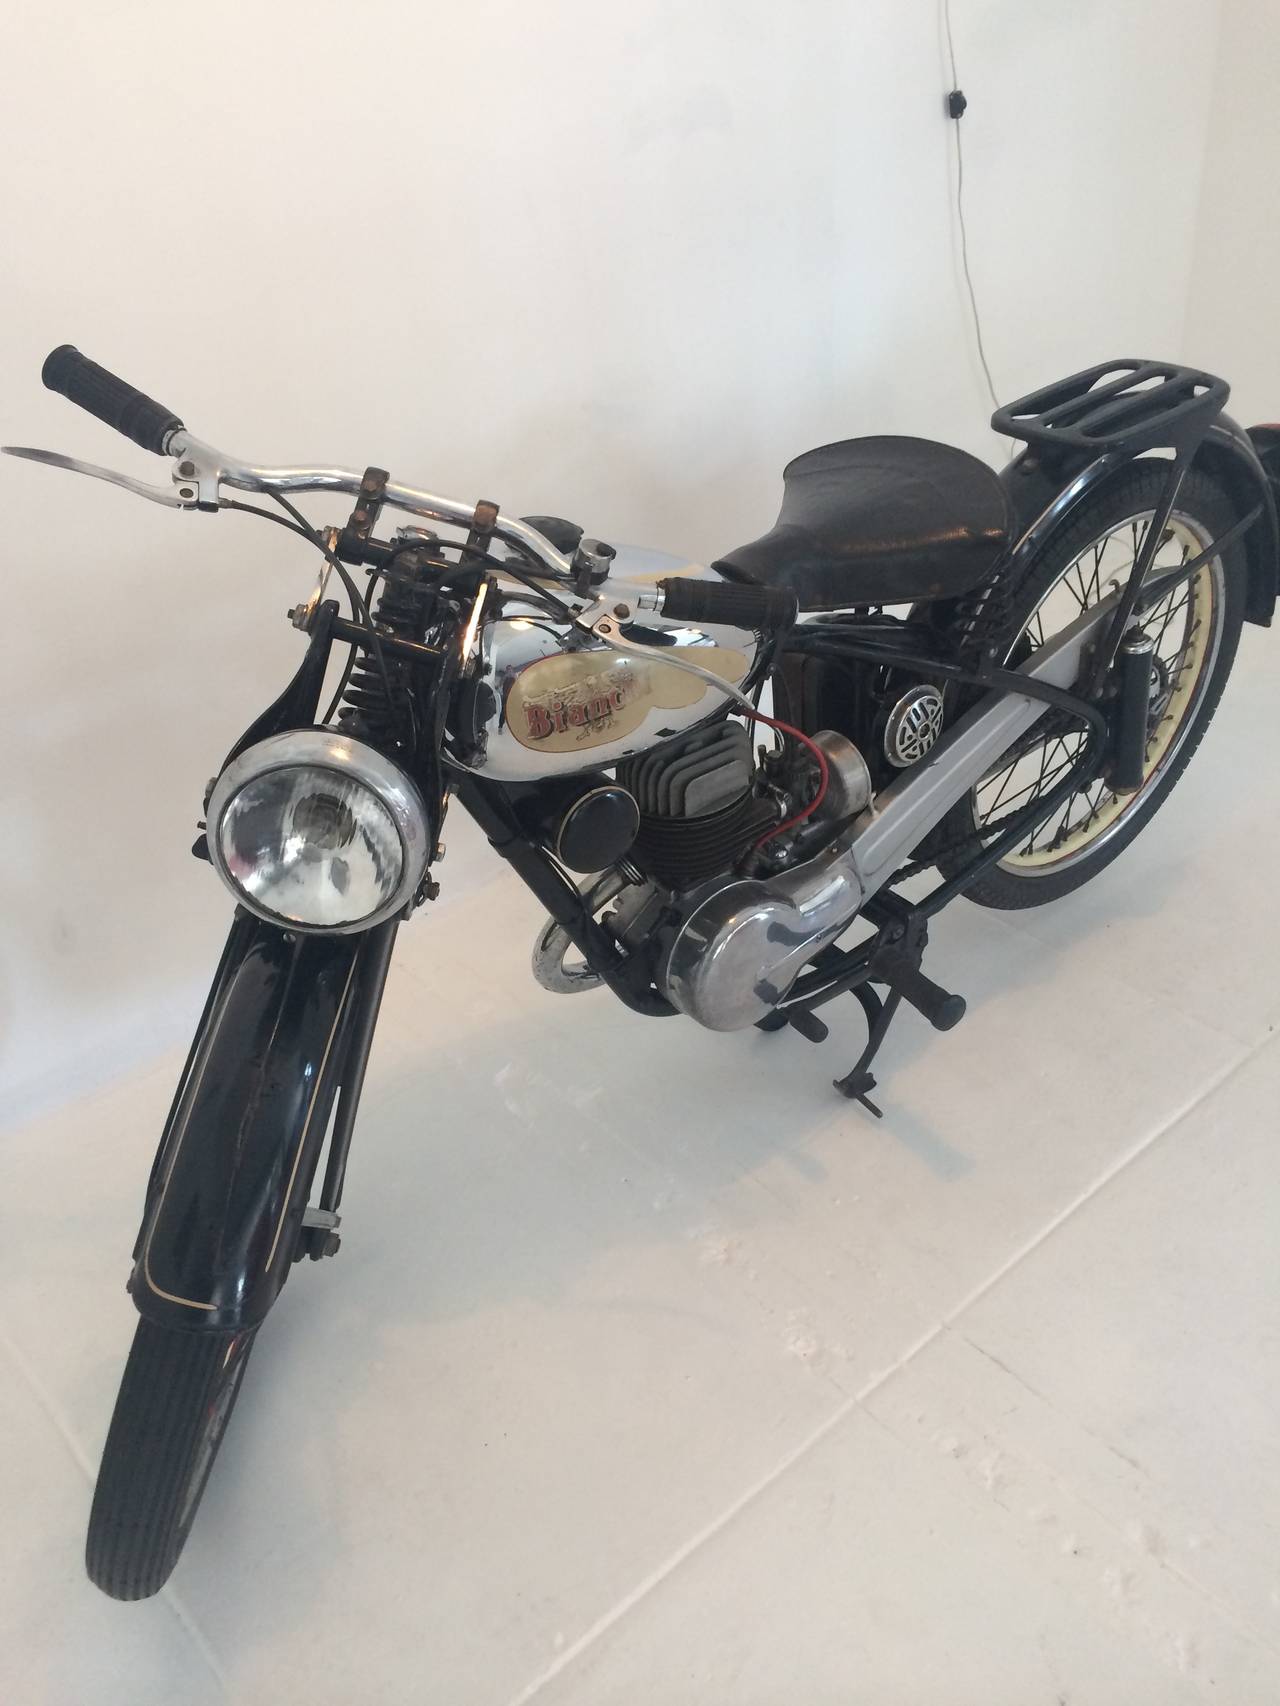 Bianchina Motorcycle, 1951 For Sale at 1stdibs